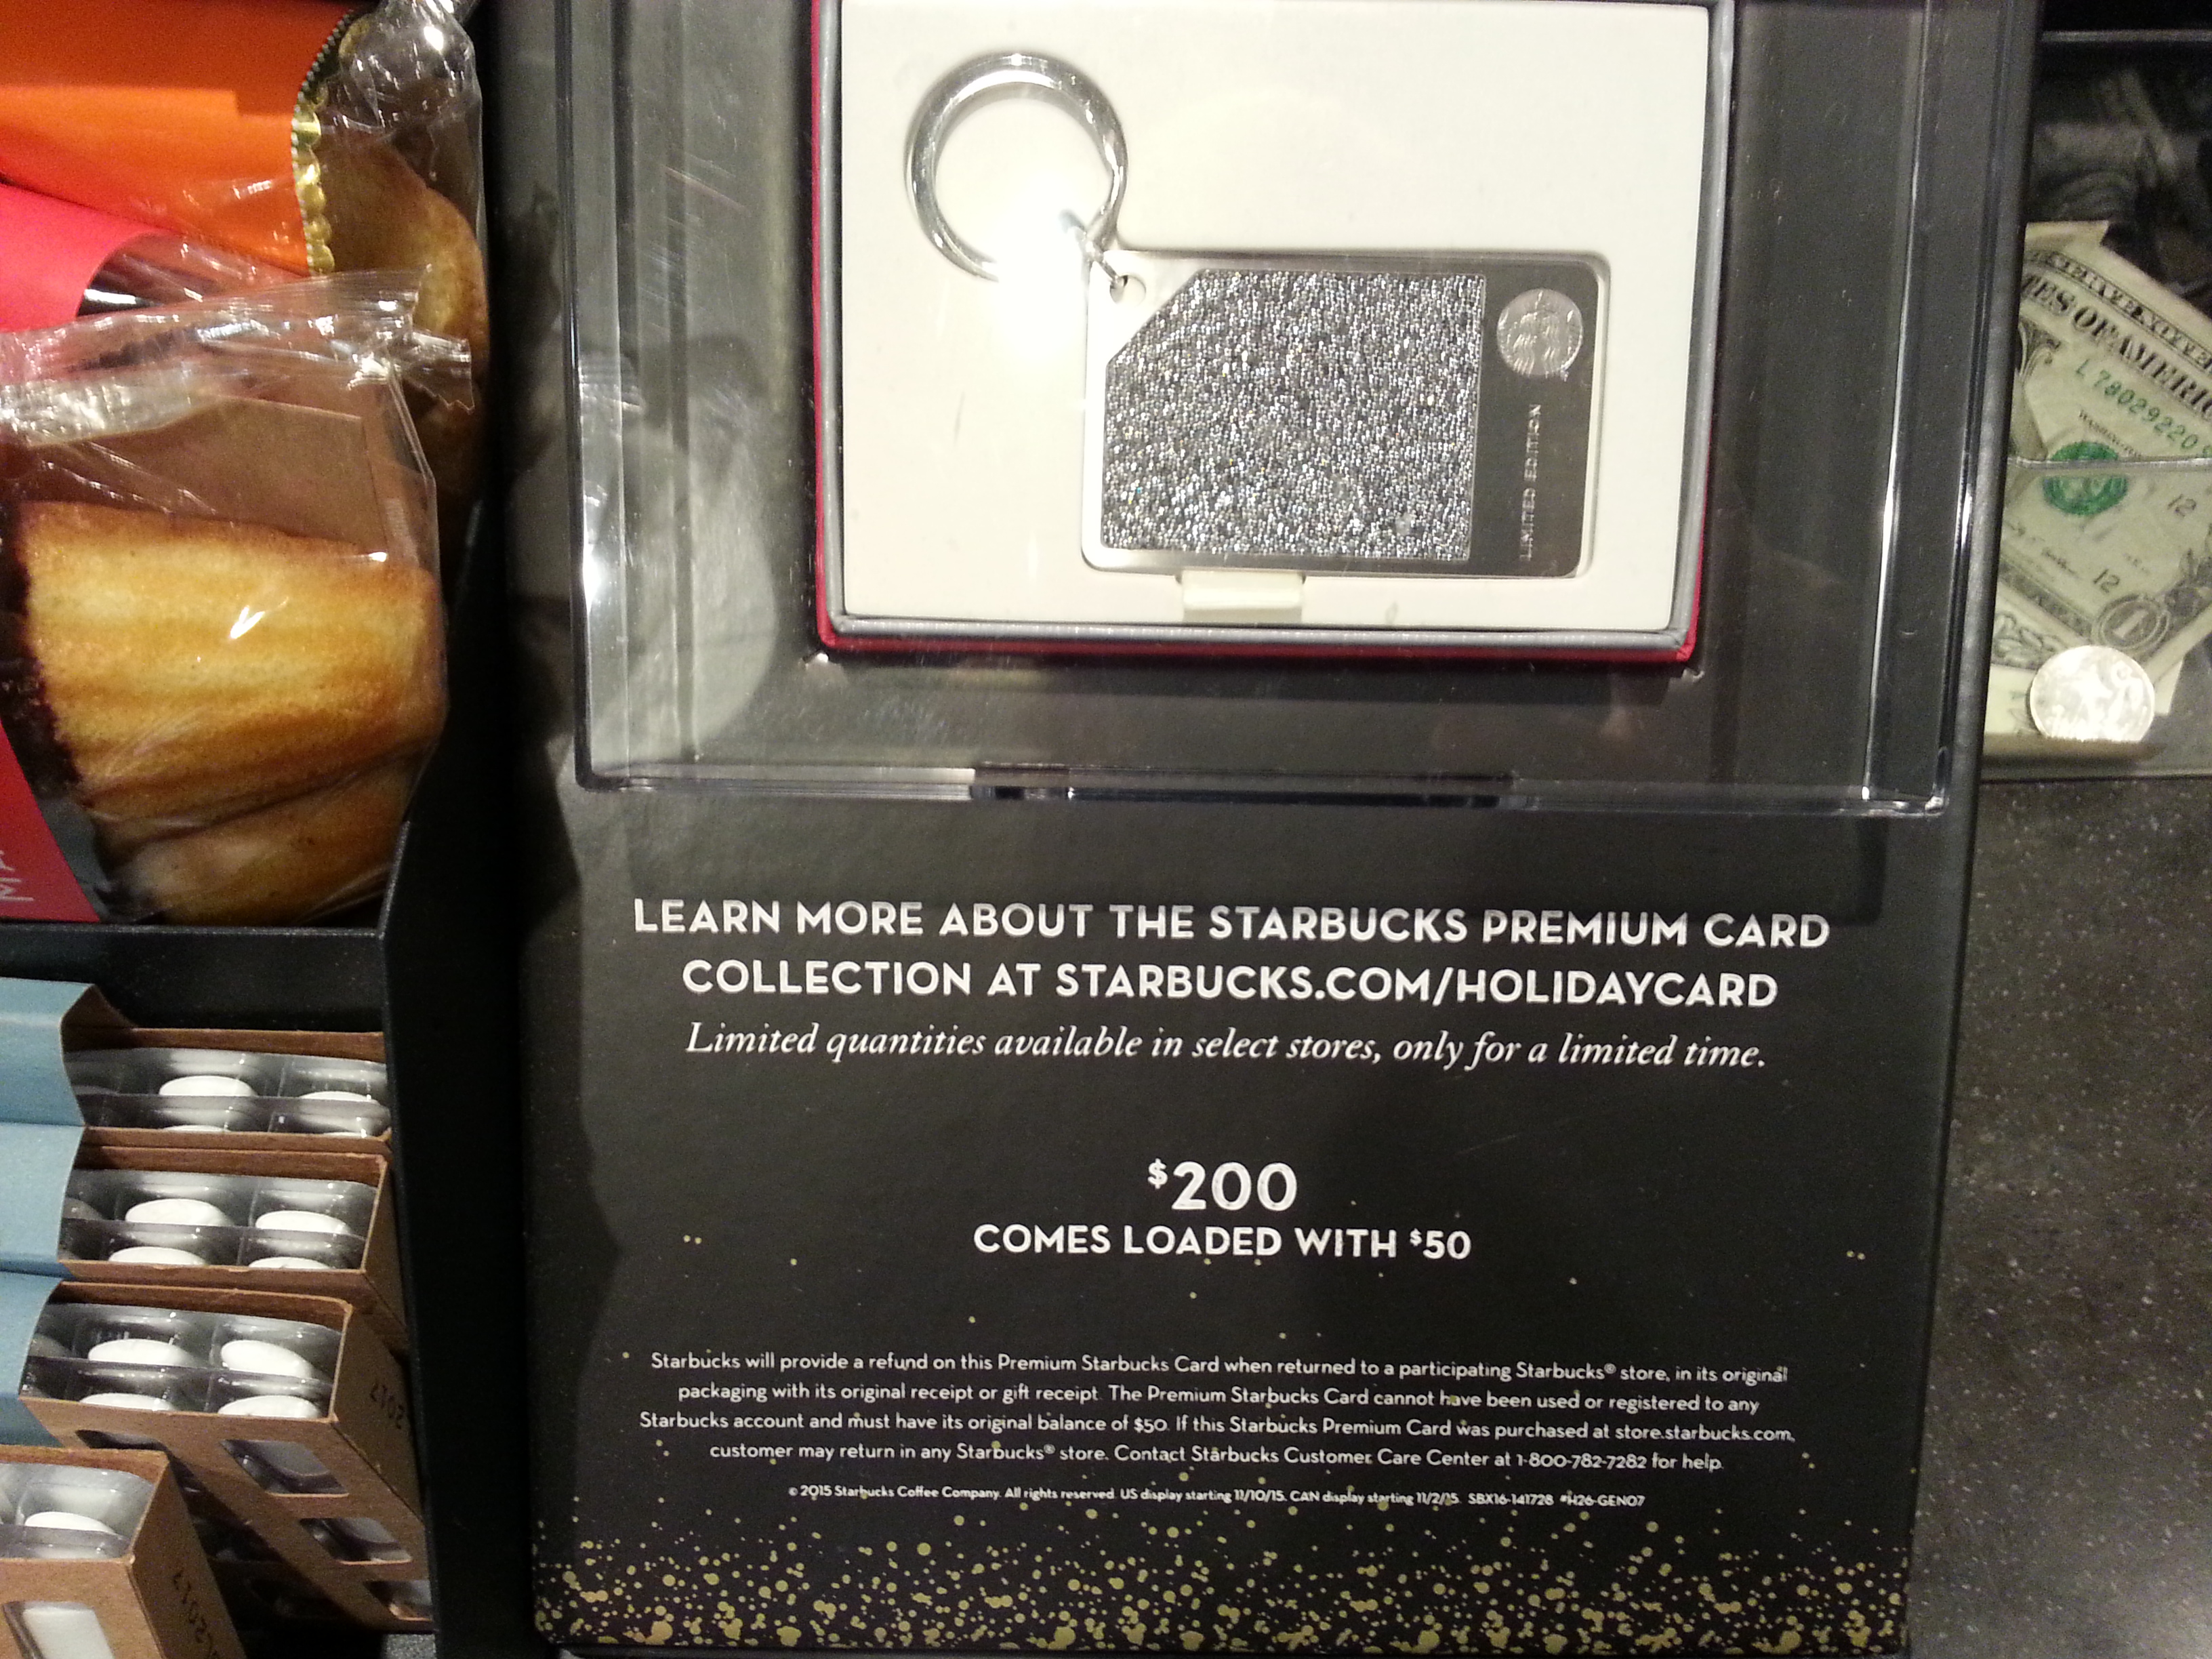 infuriating electronics - Che Vinorero No Learn More About The Starbucks Premium Card Collection At Starbucks.ComHolidaycard Limited quantities available in select stores, only for a limited time, $200 Comes Loaded With Starbucks wilde aralund on the Prem